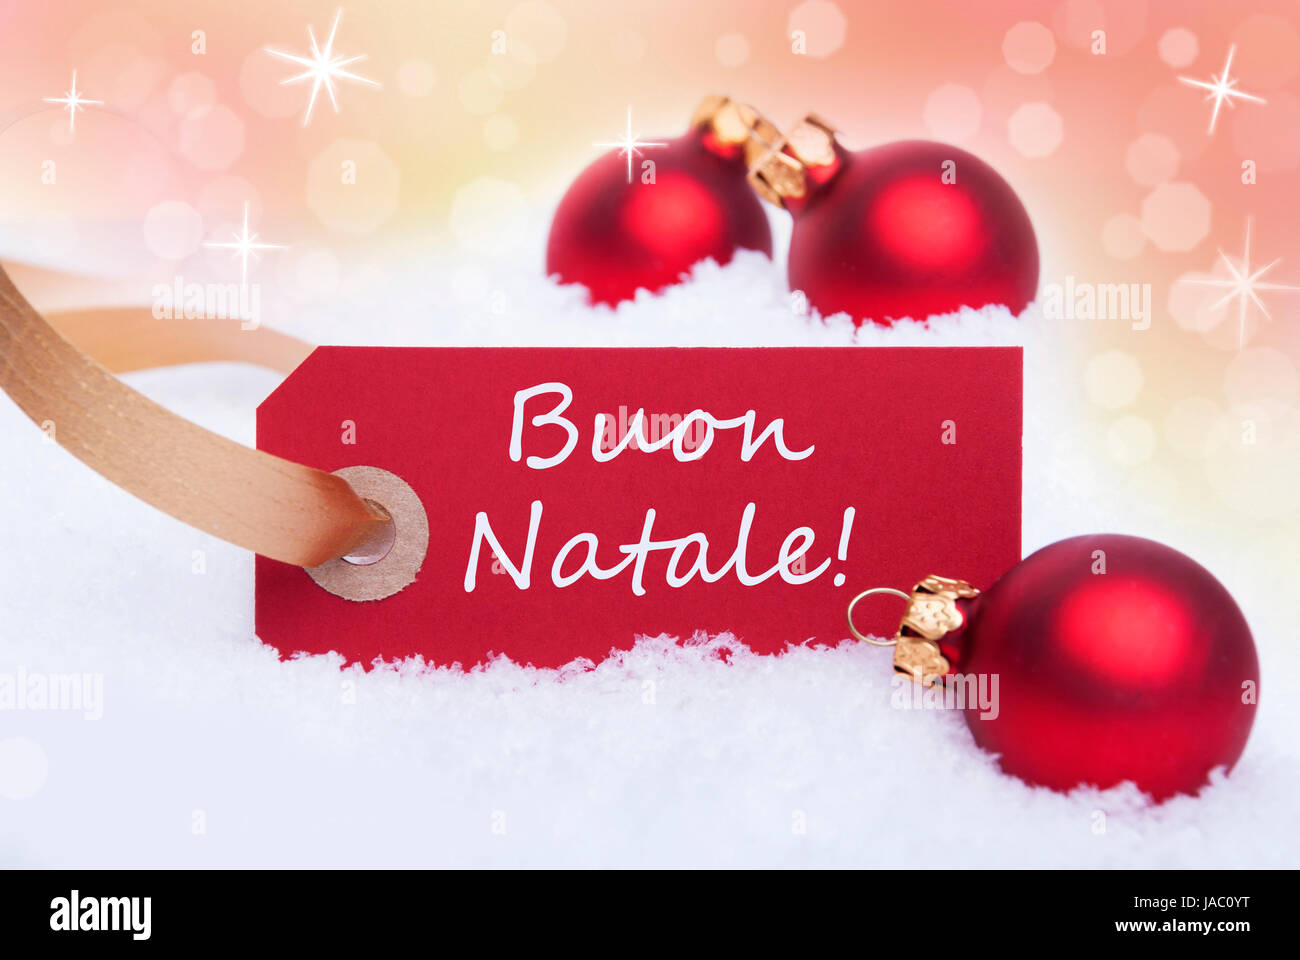 Buon Natale Italian.Italian Words Buon Natale Means High Resolution Stock Photography And Images Alamy